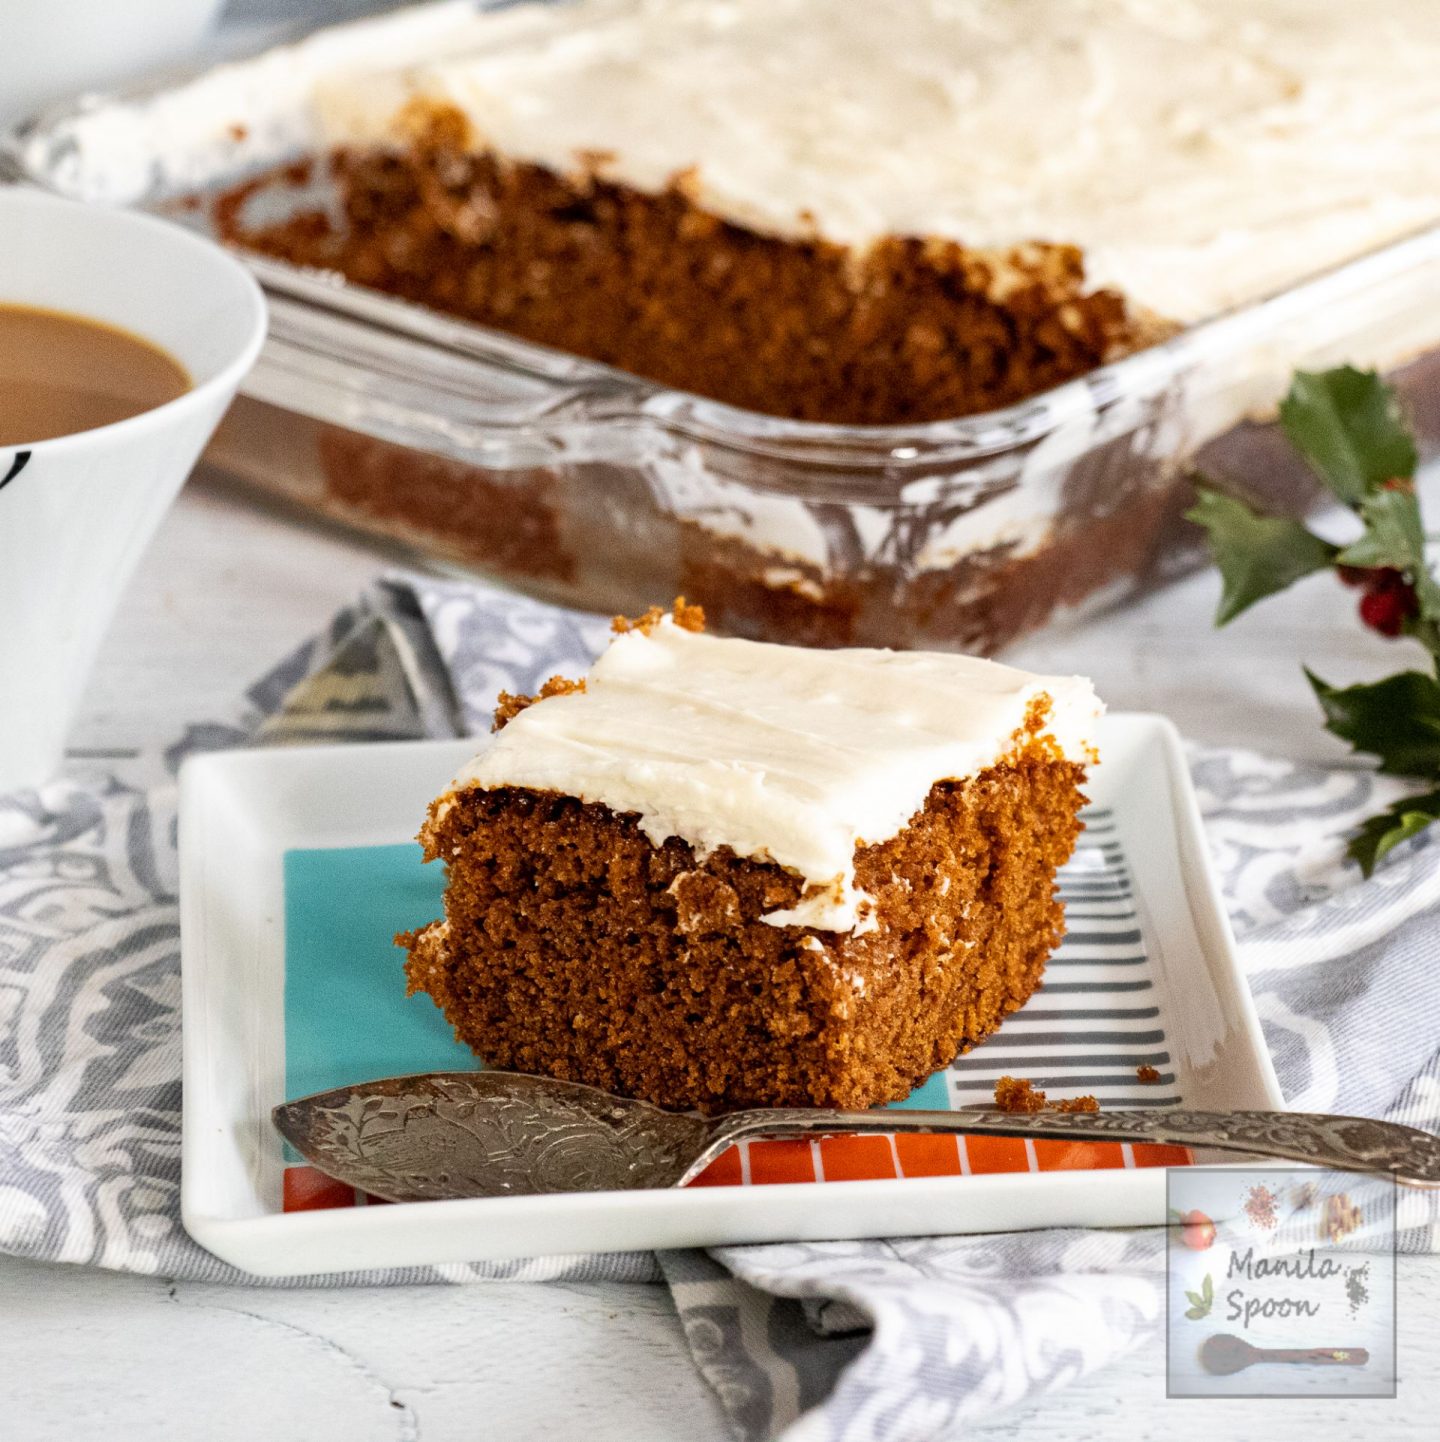 Ginger and Molasses Cake with Cream Cheese Frosting (Gingerbread Cake)